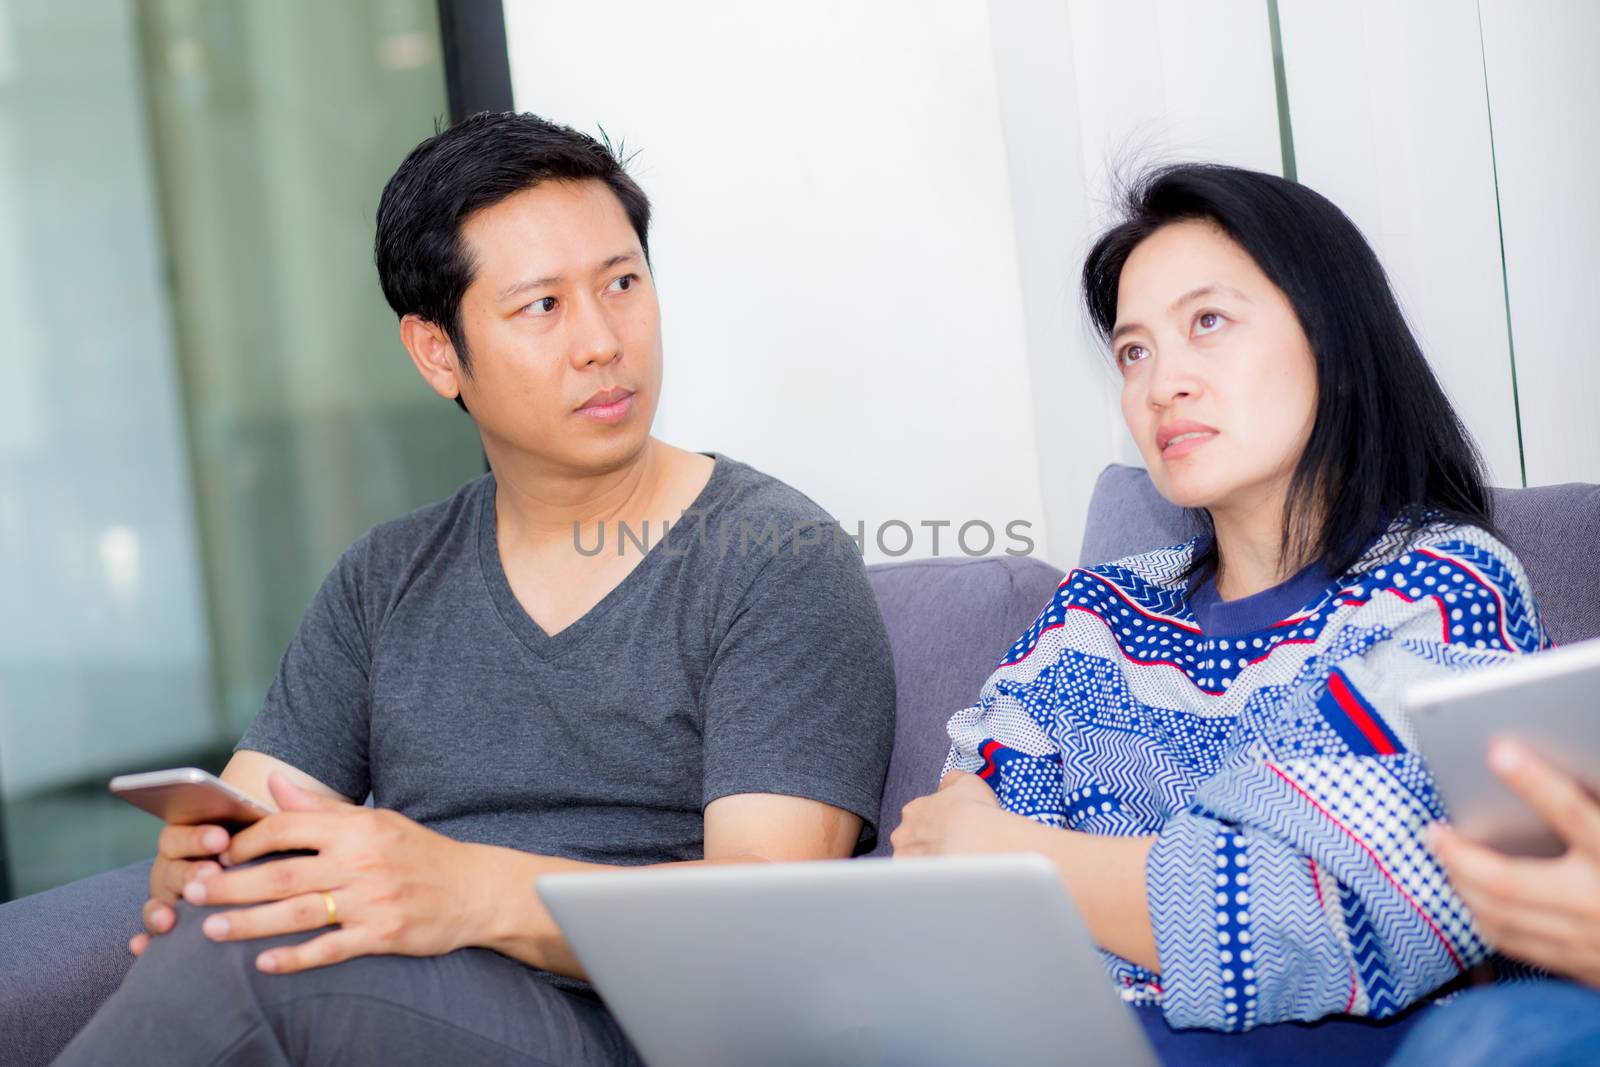 Asian two people friends on line with multiple devices and talking sitting on a sofa in the living room in a house interior, communication concept.